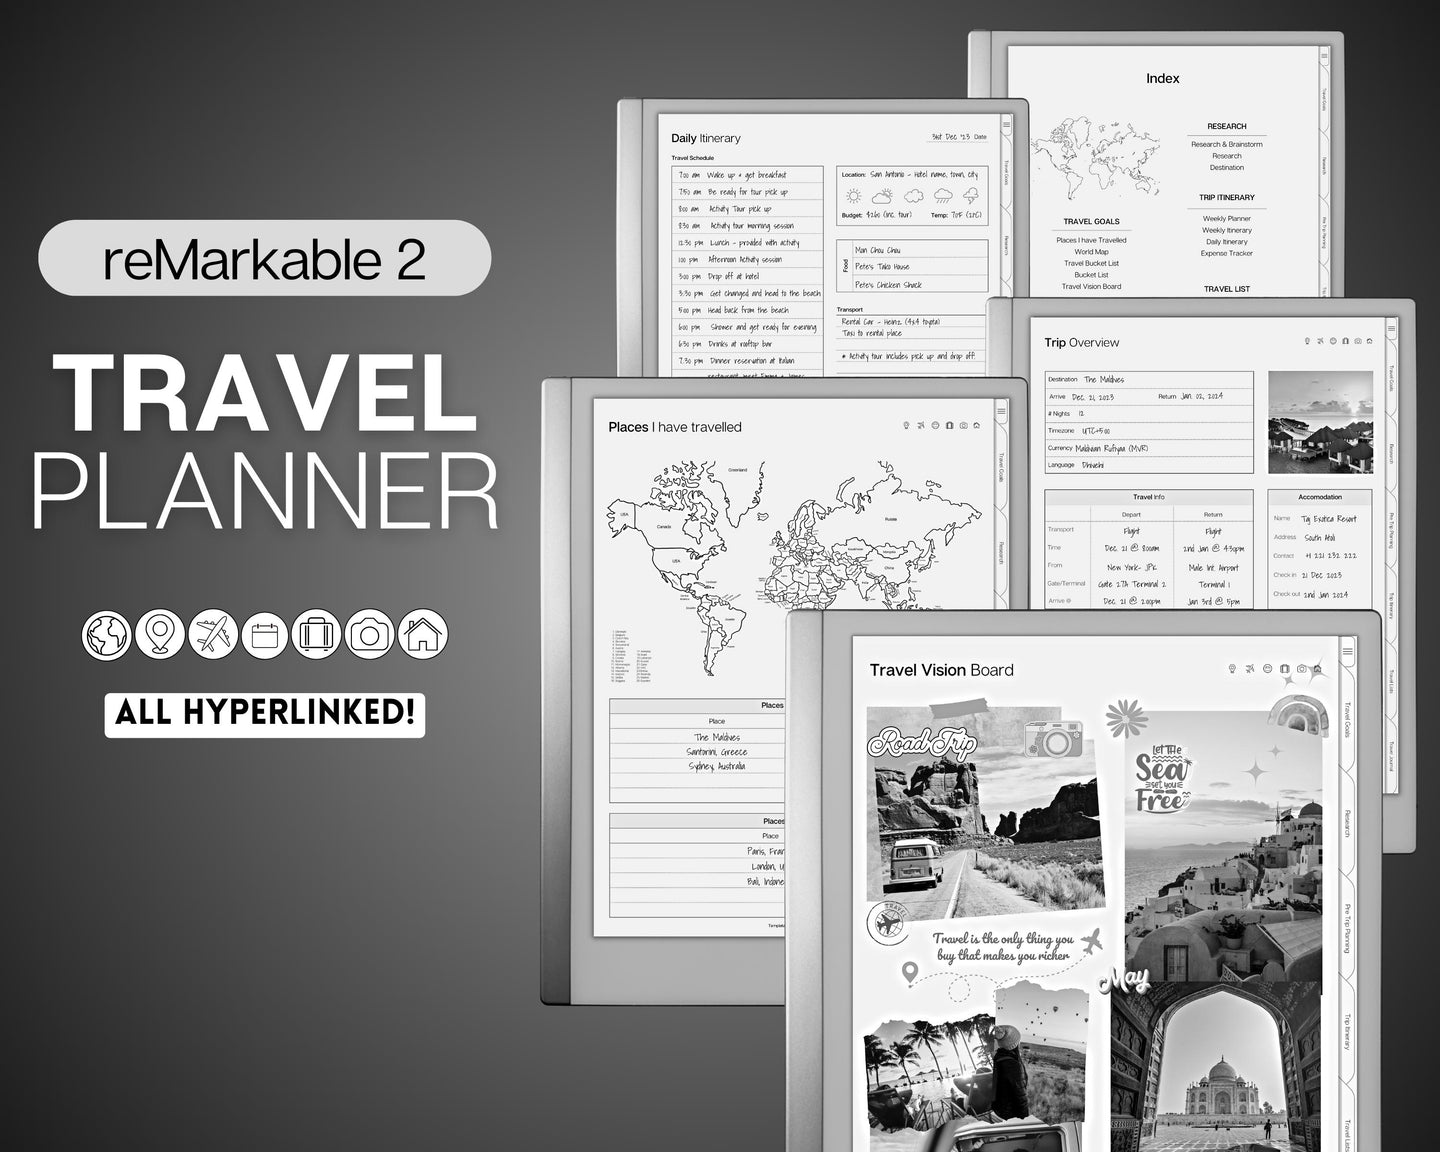 reMarkable 2 Travel Planner | Digital Travel Journal, Vacation Diary & Travel Iteniary for Remarkable 2